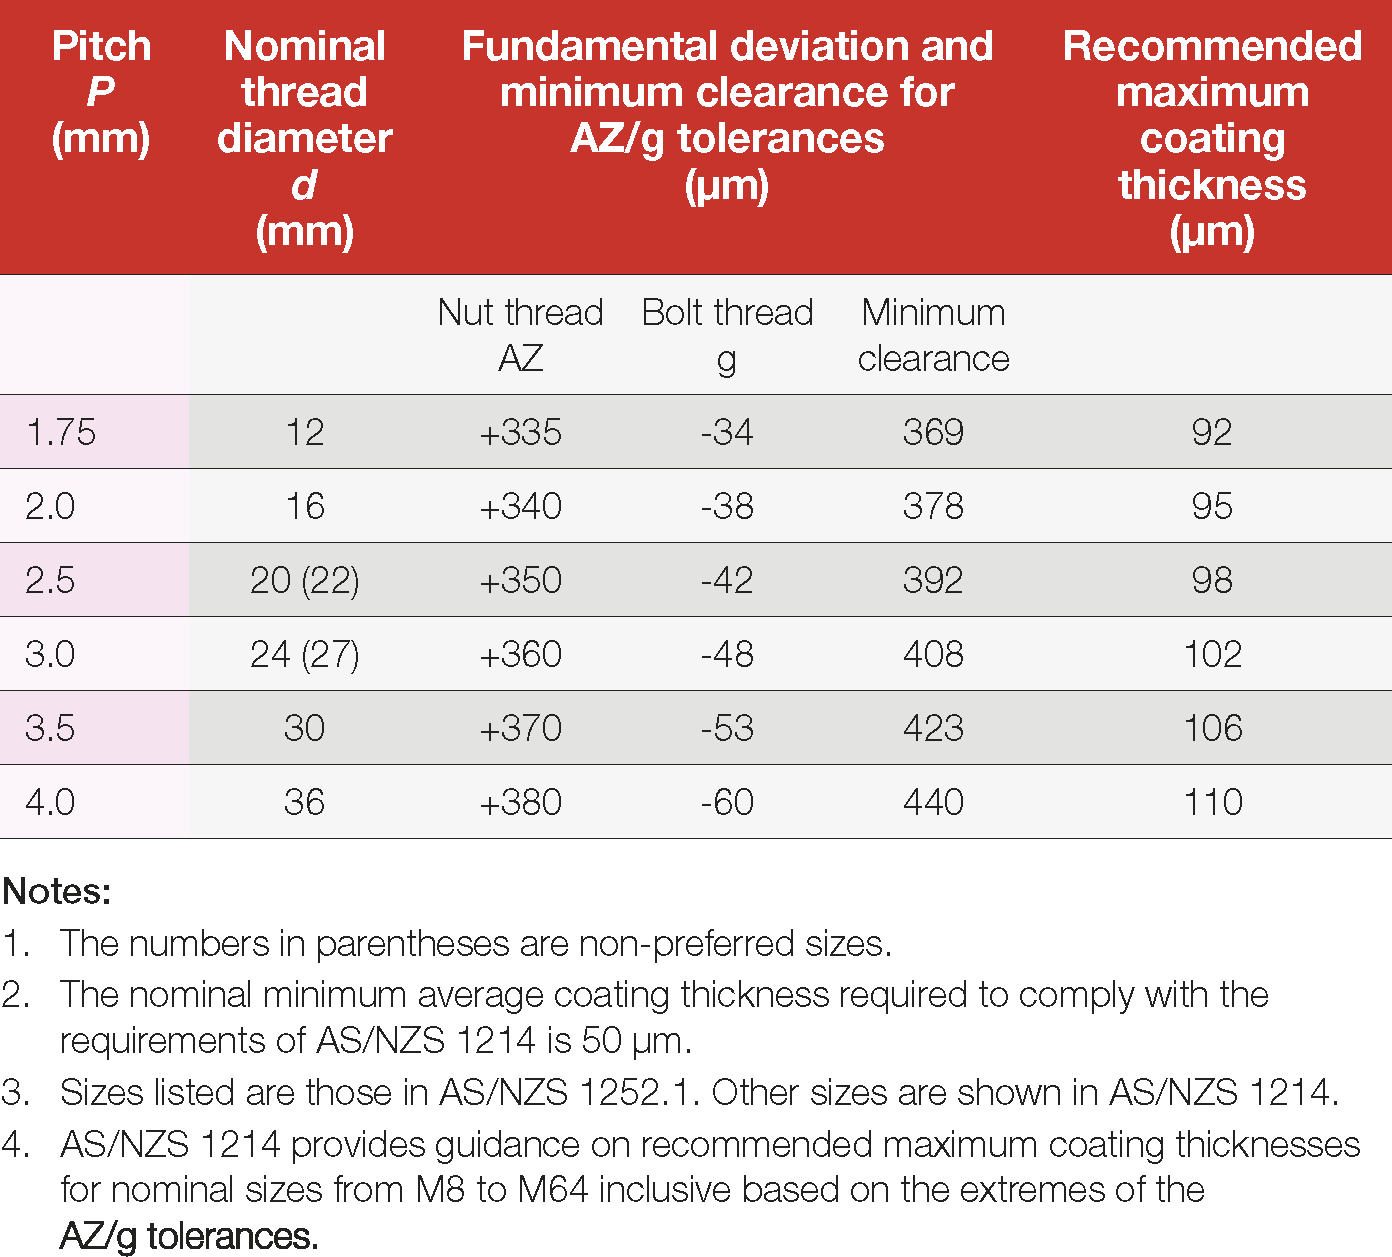 Table 22: Fundamental deviations and upper limits of coating thicknesses for assemblies with nuts tapped oversize